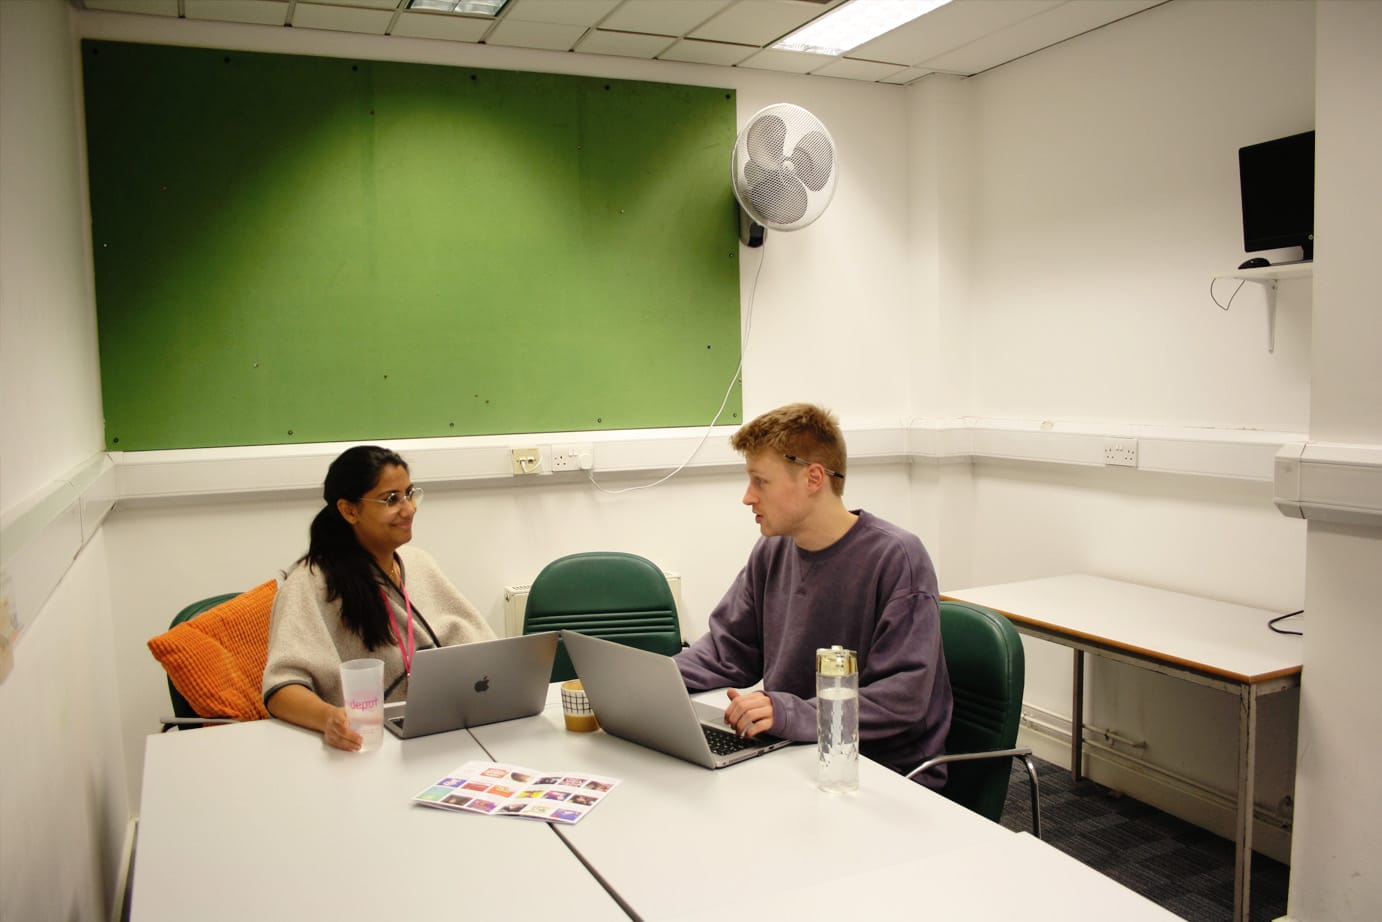 Two artsdepot team members converse in the meeting room. They are engaged in conversation with laptops open and water and coffee cups on the table. Behind them is a green noticeboard.